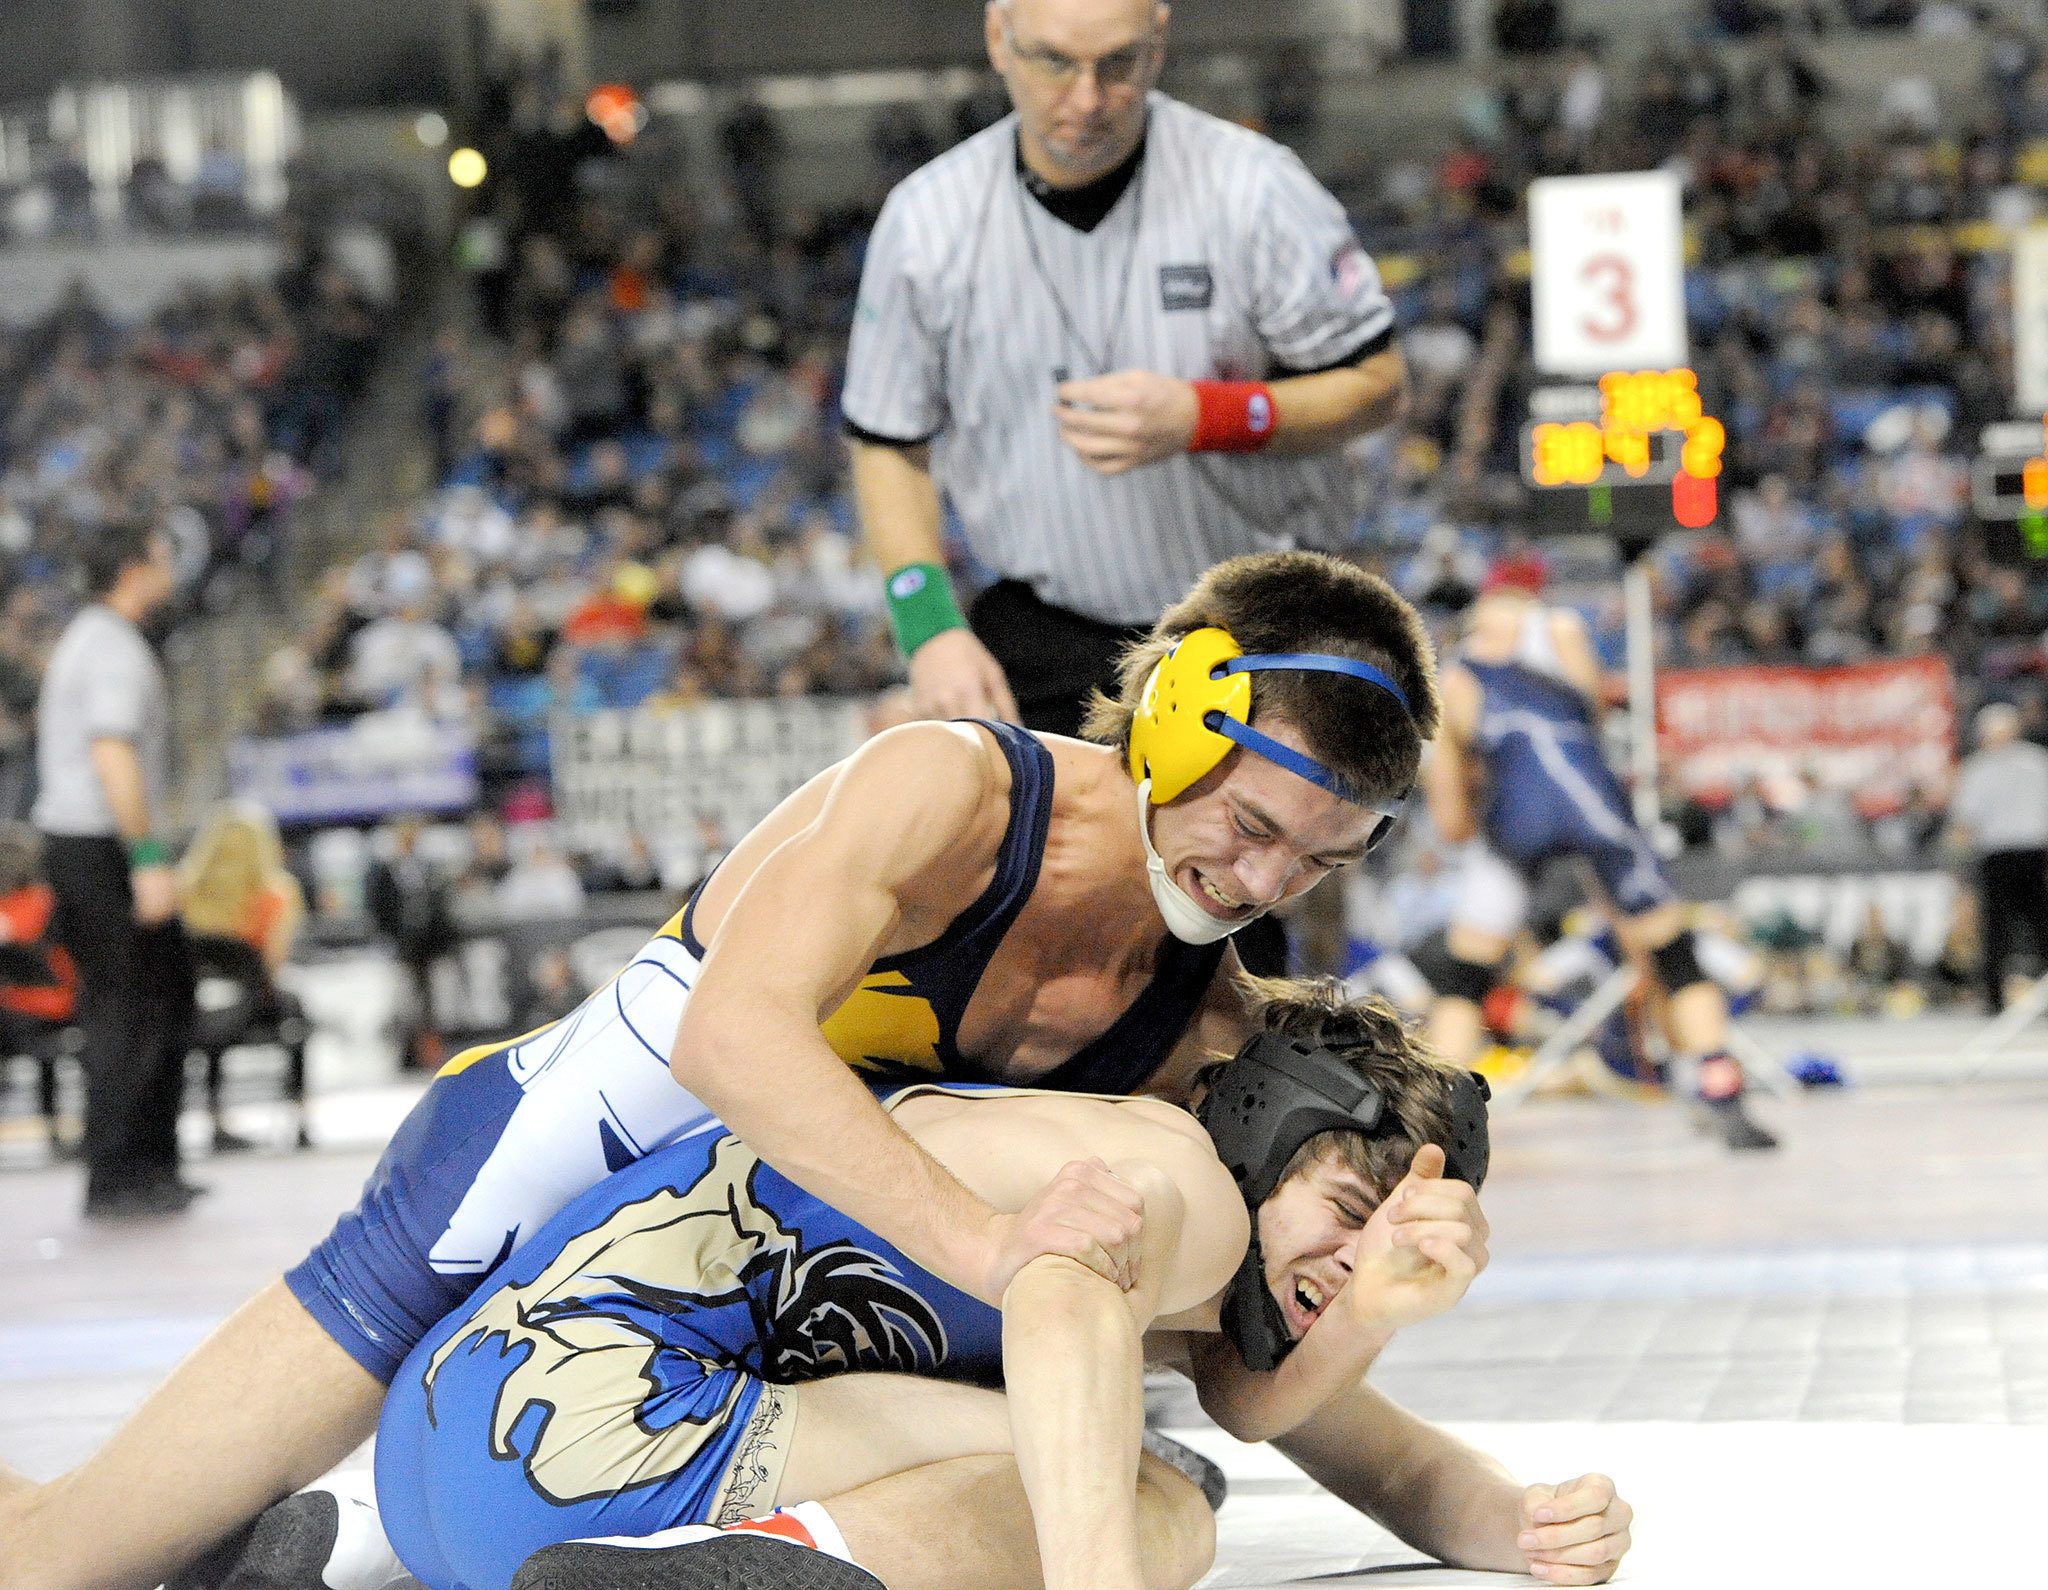 Lonnie Archibald/for Peninsula Daily News Forks’ Garrison Schumack, in top position, defeats Ethan Newman of Deer Park to place third in the 1A division’s 145-pound class at Mat Classic XXIX in the Tacoma Dome.